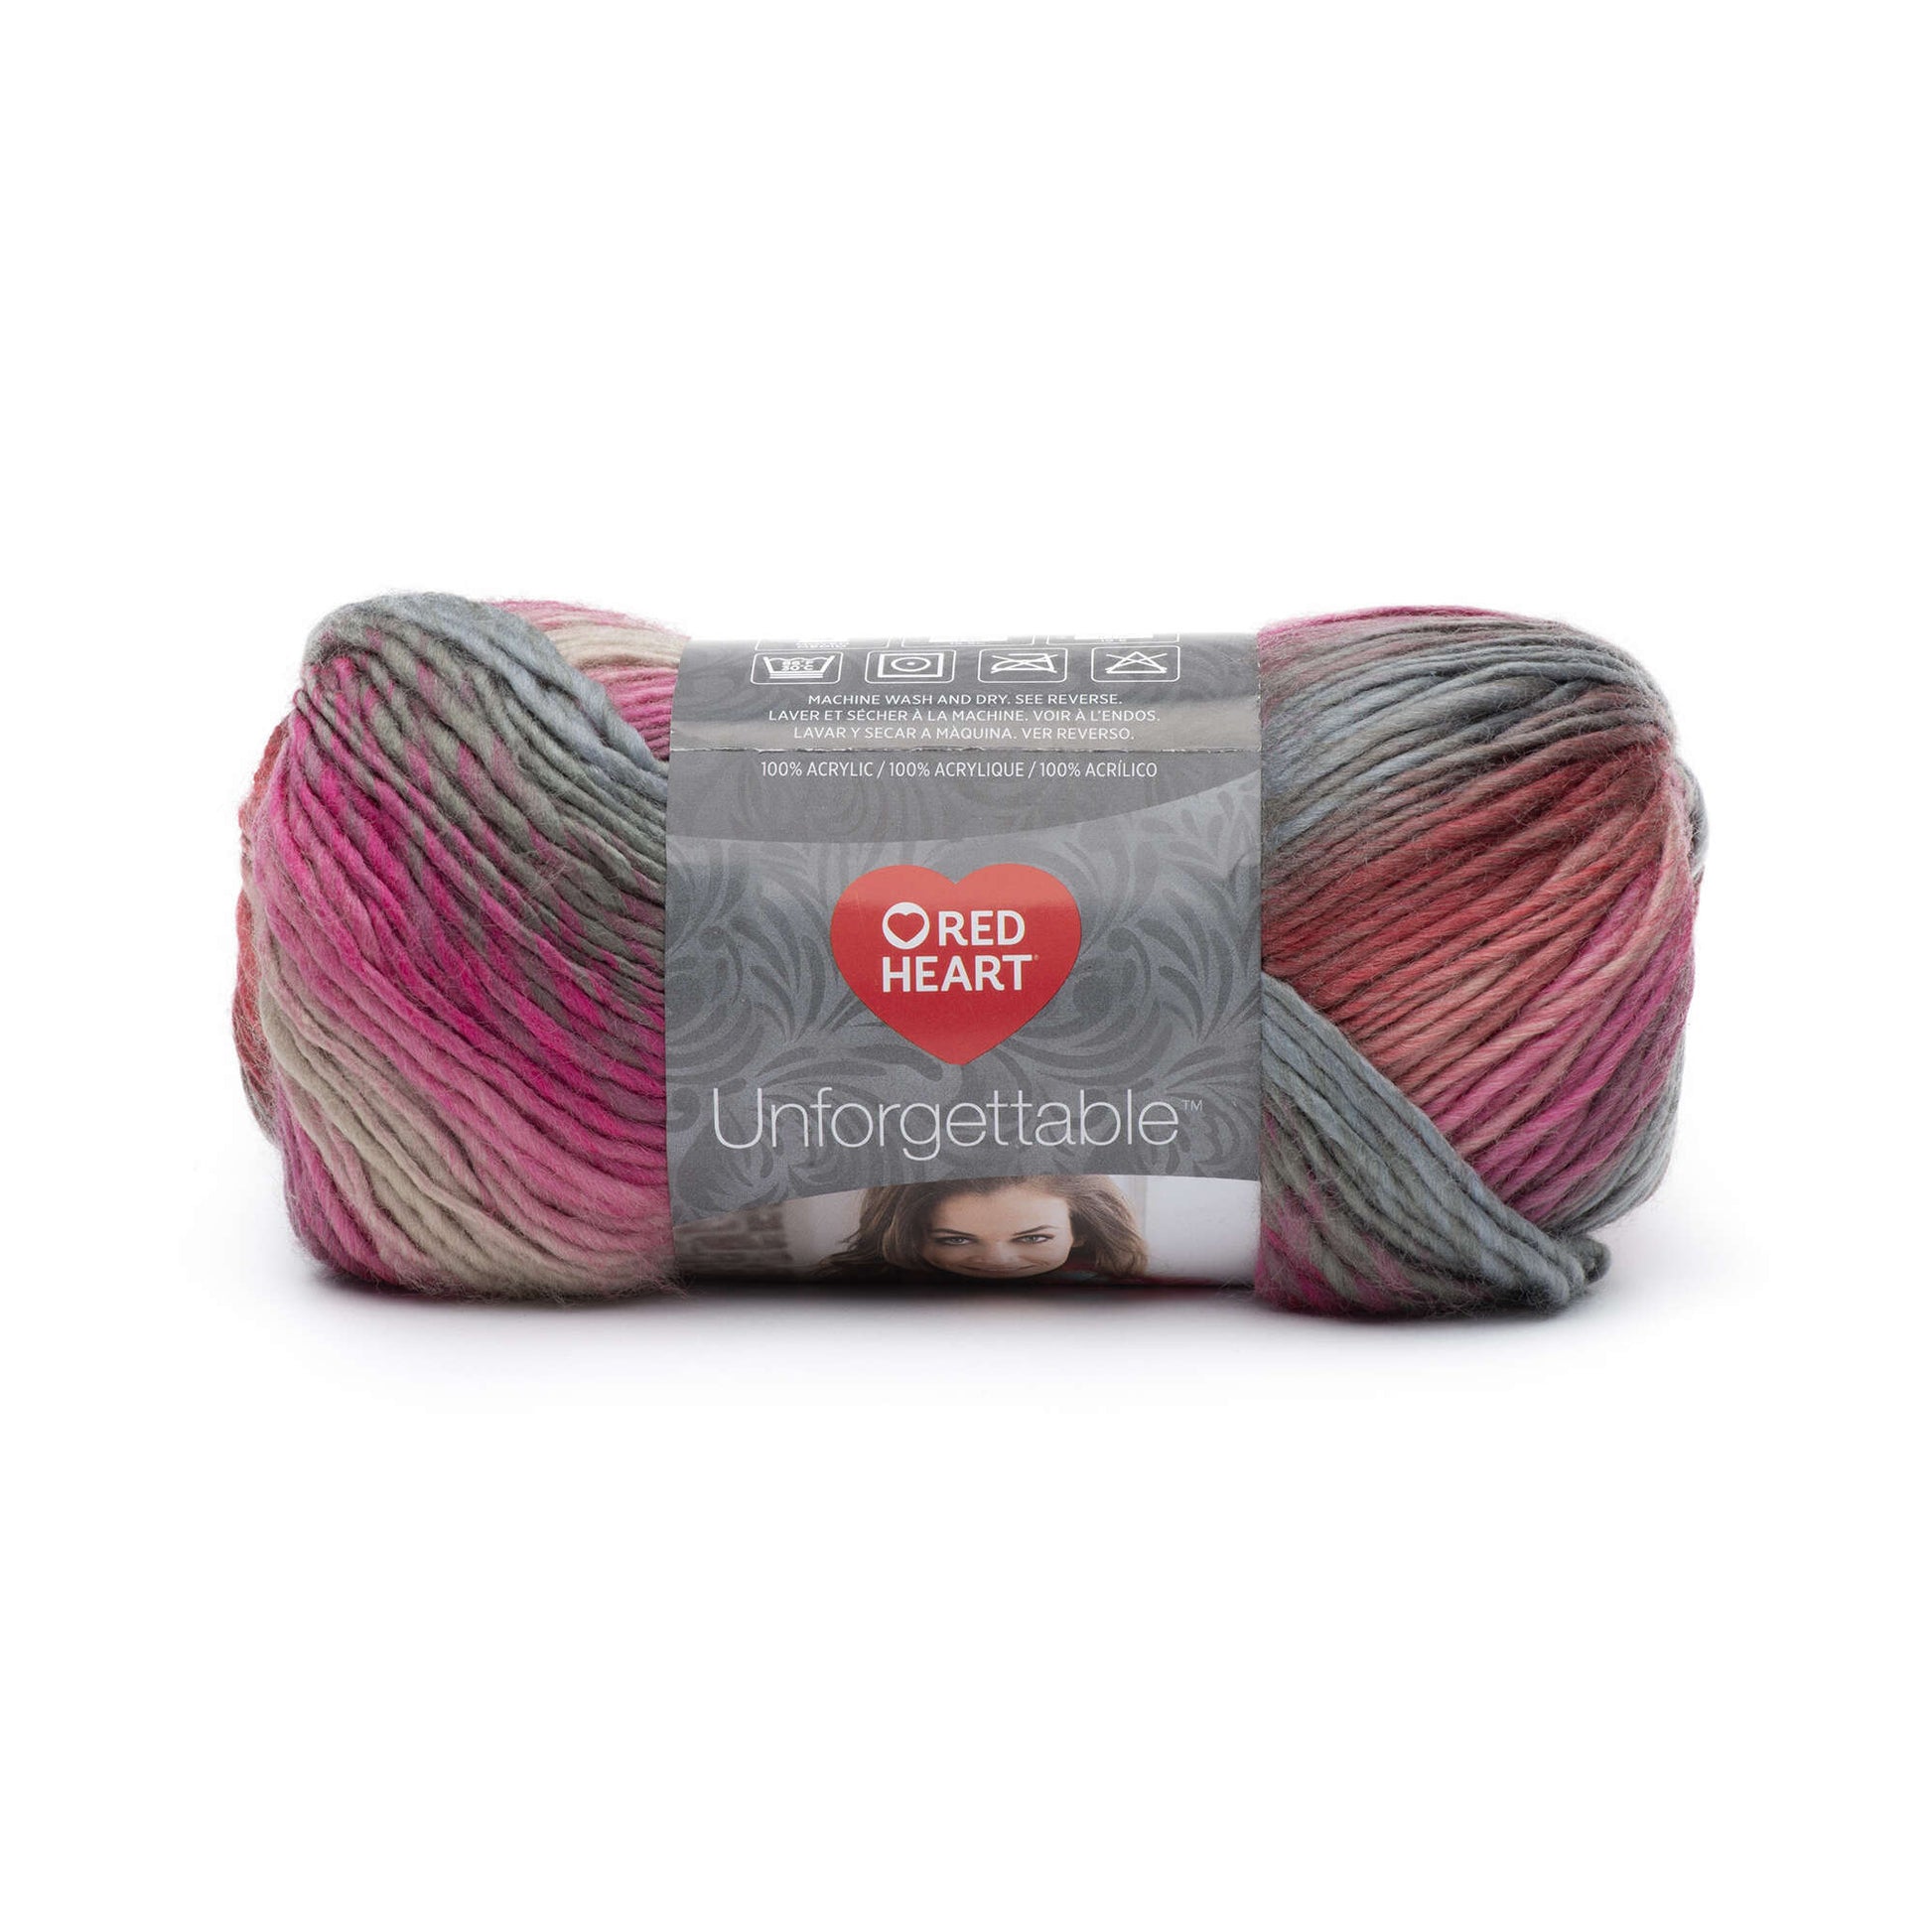 Red Heart Unforgettable Yarn - Clearance Shades* Heirloom